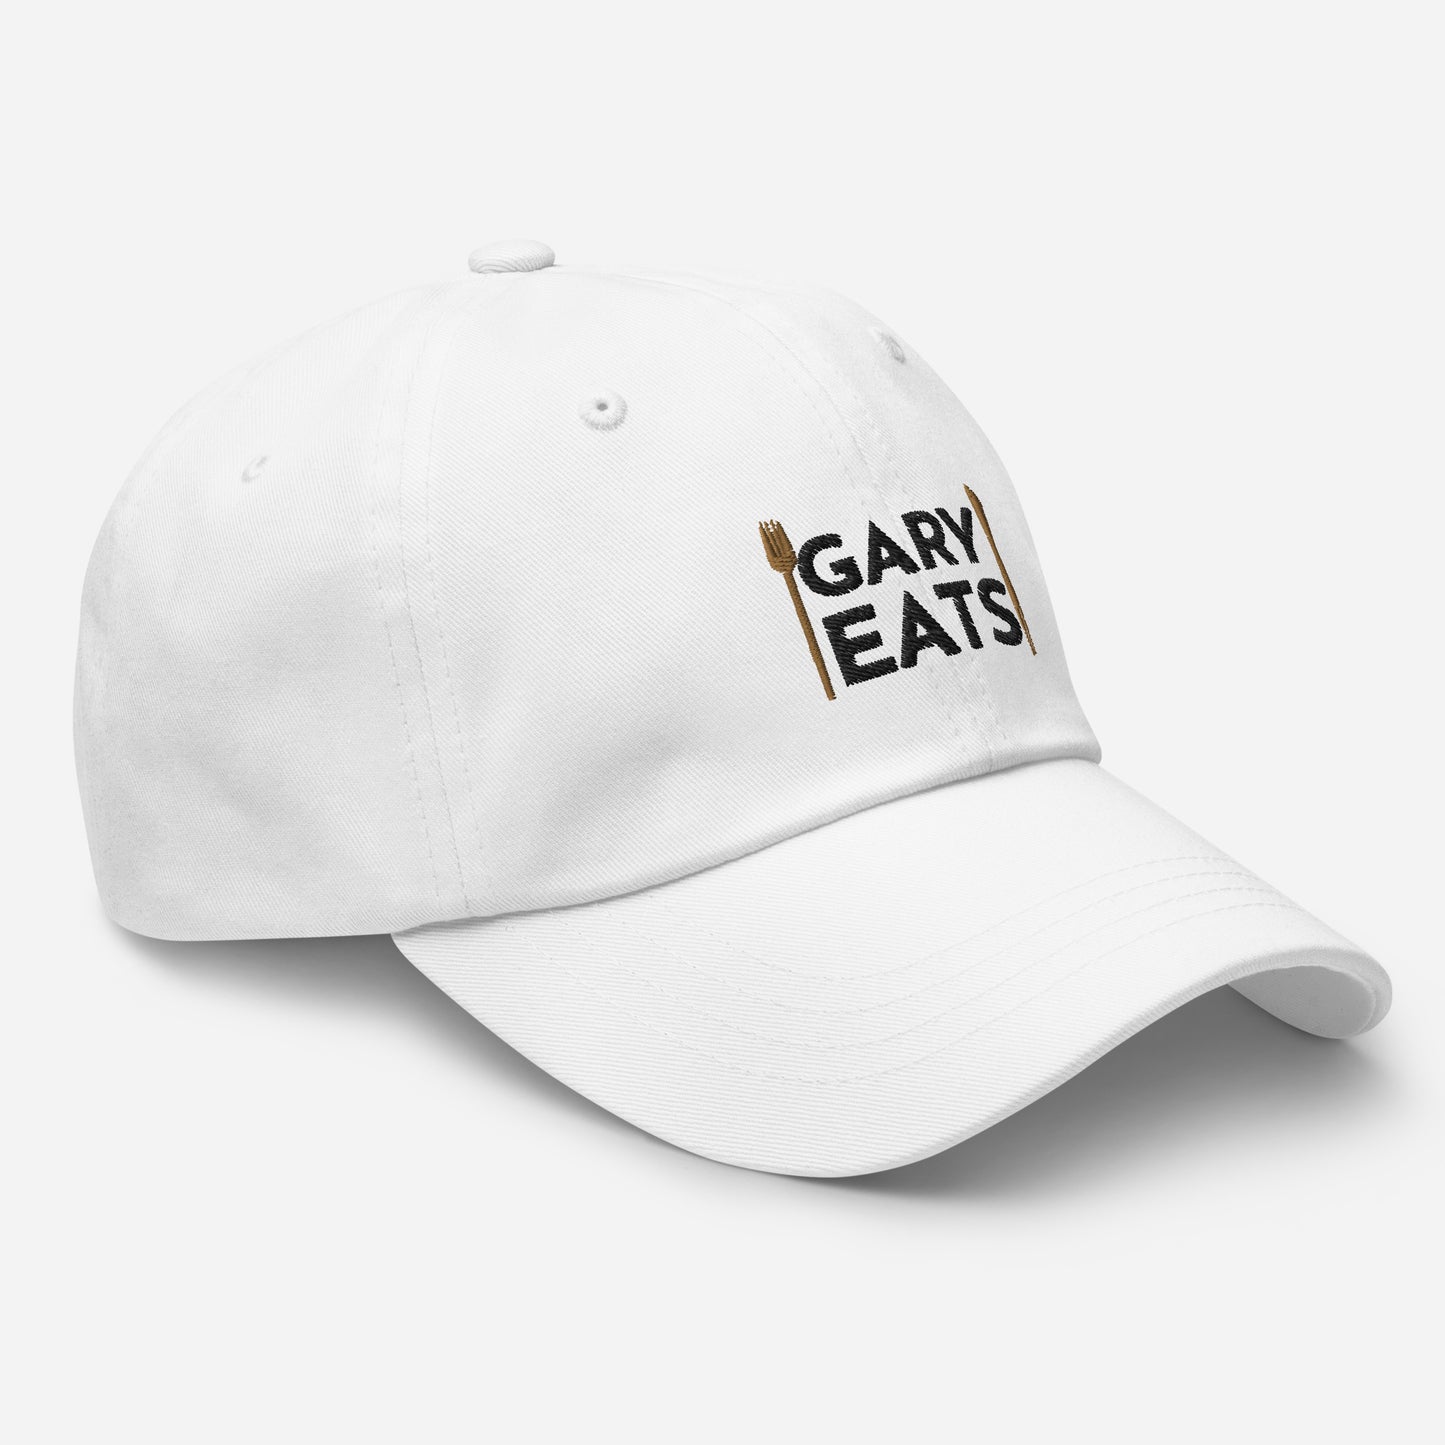 Gary Eats Embroidered Unisex Cap